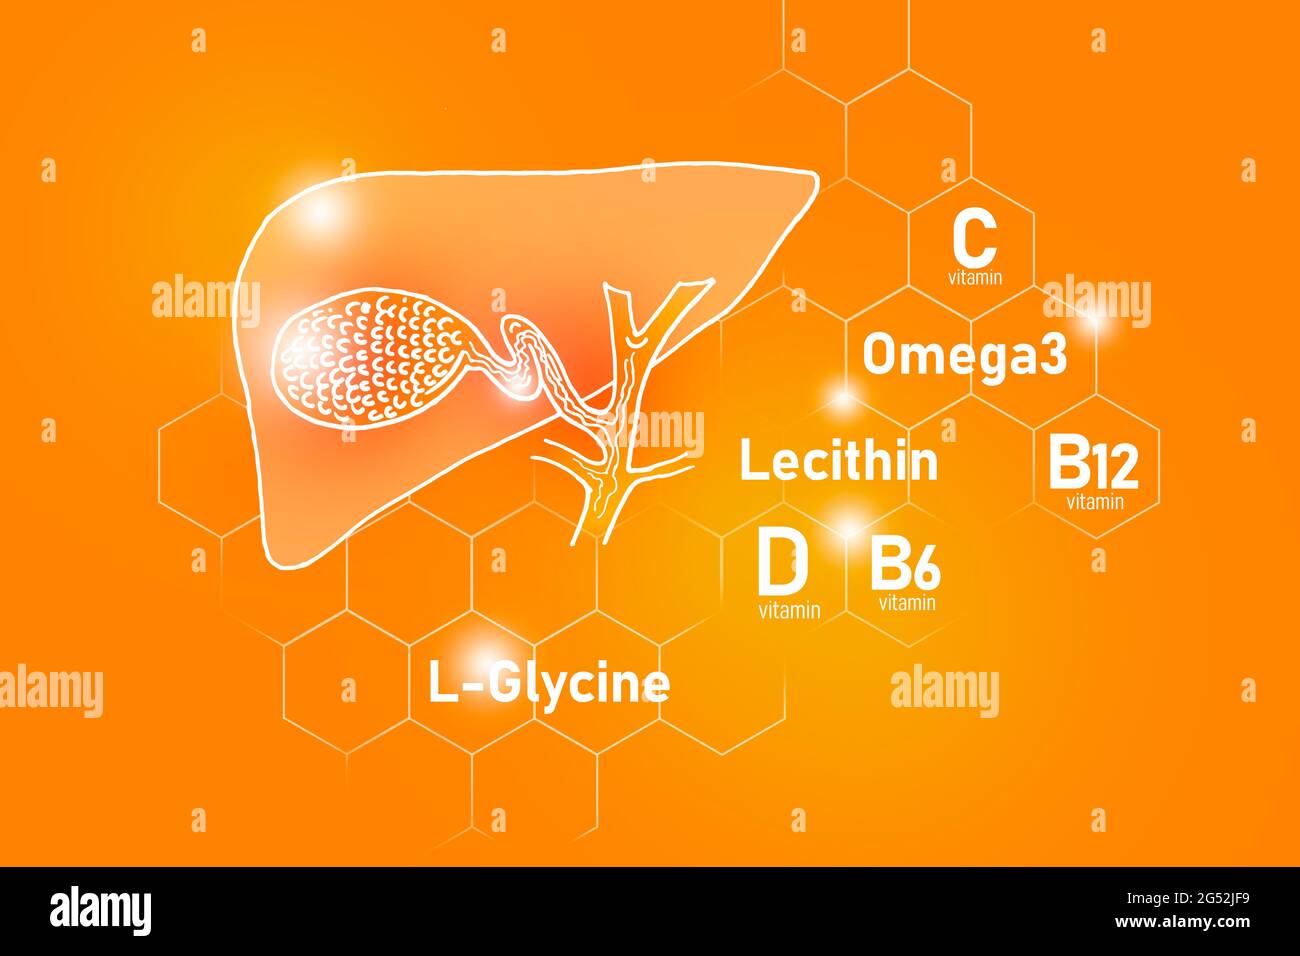 Essential nutrients for Gall Bladder health including Omega 3, L-Glycine, Omega3, Lecithin on positive orange background. Stock Photo